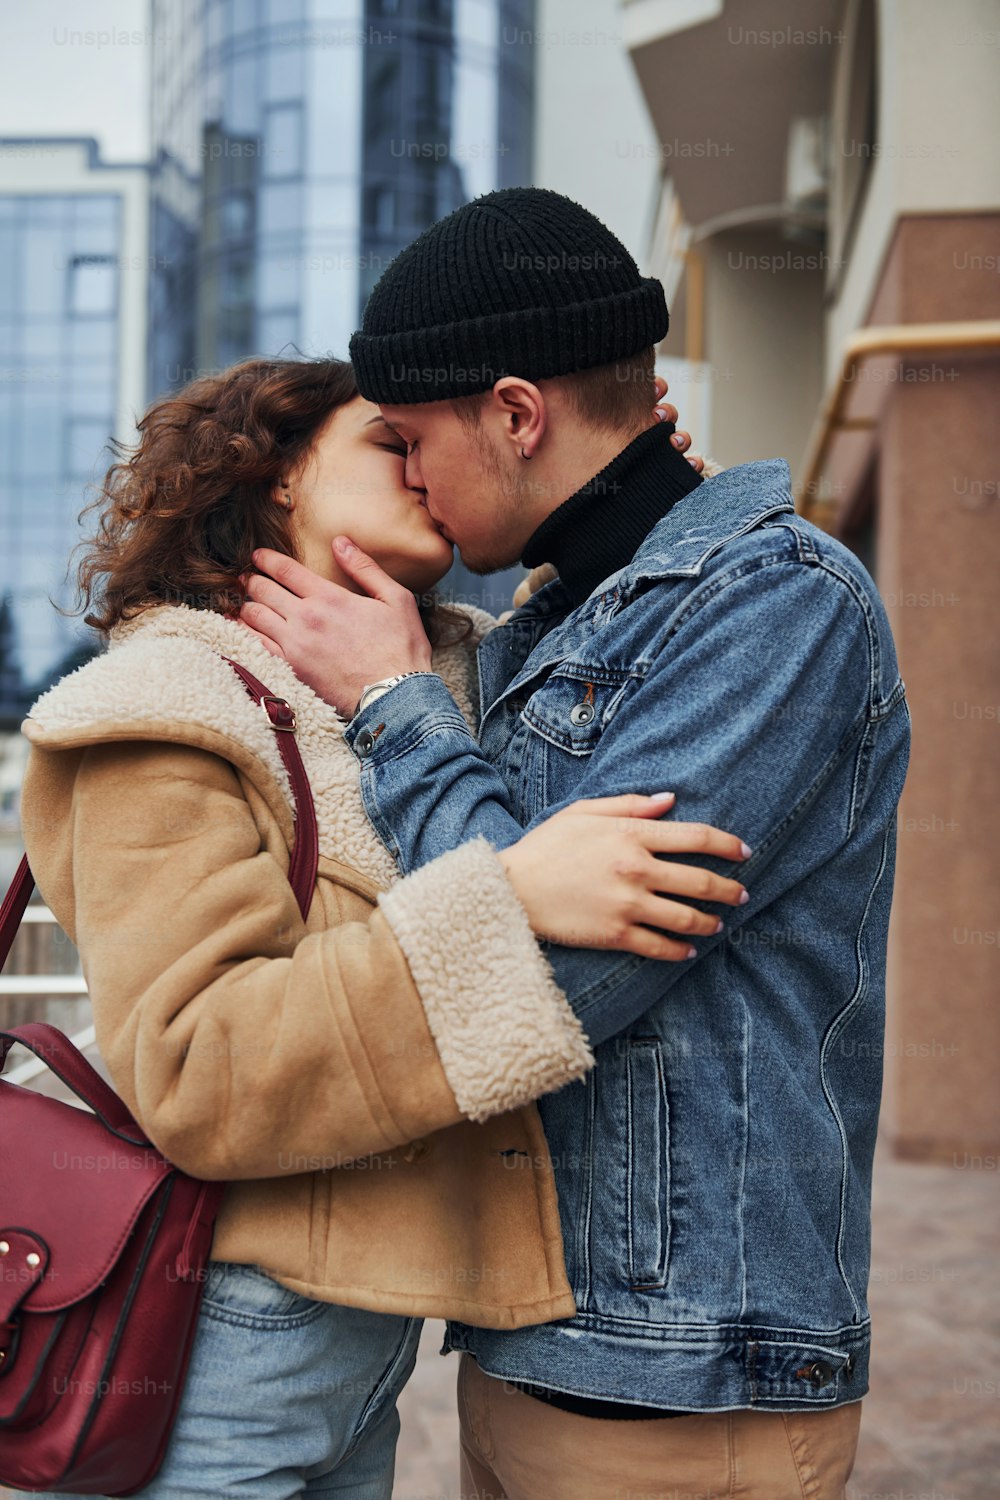 Cheerful couple in casual warm clothes kissing outdoors in the city near business building.